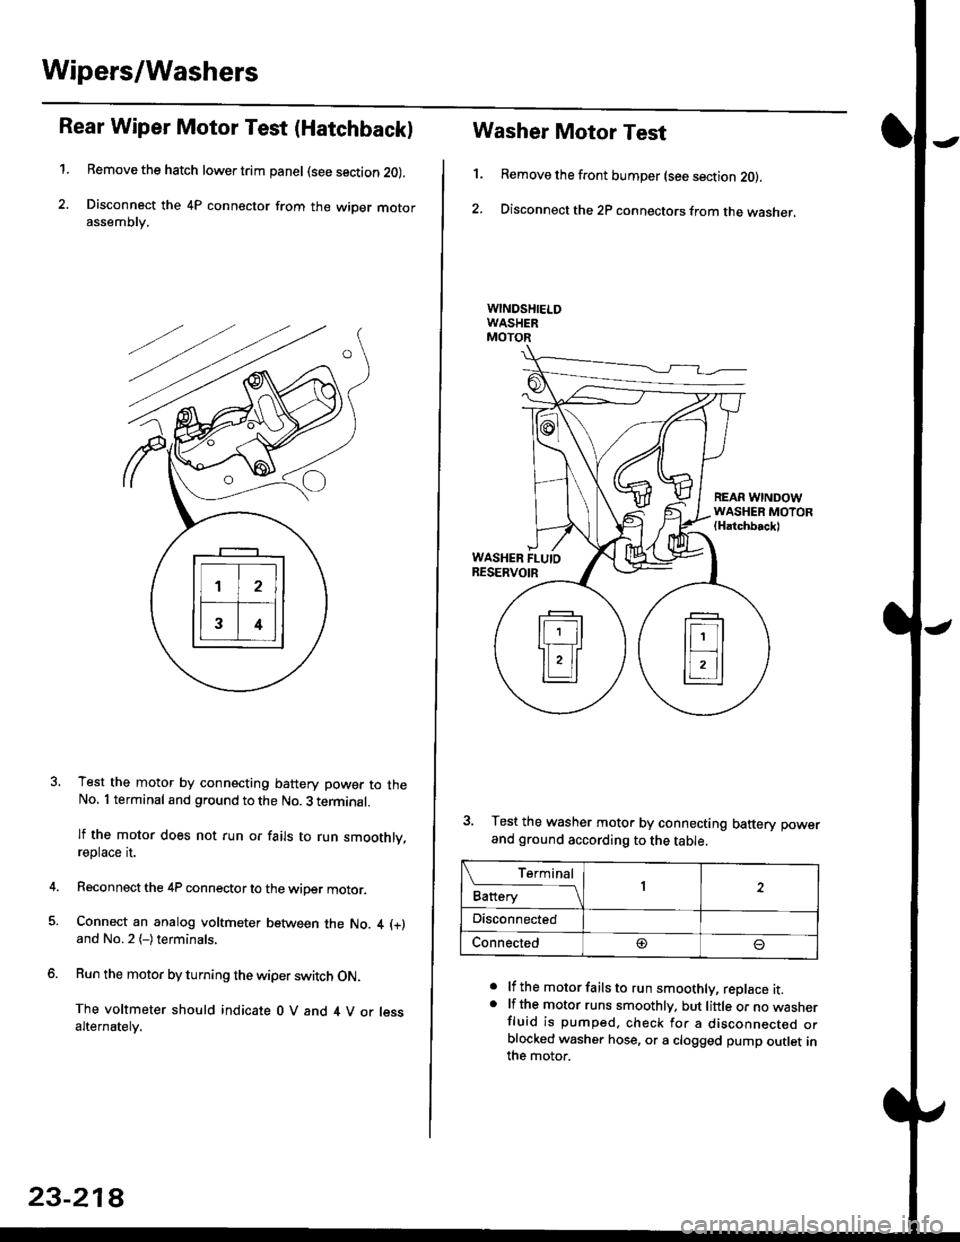 HONDA CIVIC 1997 6.G Workshop Manual Wipers/Washers
Rear Wiper Motor Test (Hatchback)
1.Remove the hatch lower trim panel (see section 20).
Disconnect the 4P connector from the wiper motorassemDry,
Test the motor by connecting battery po